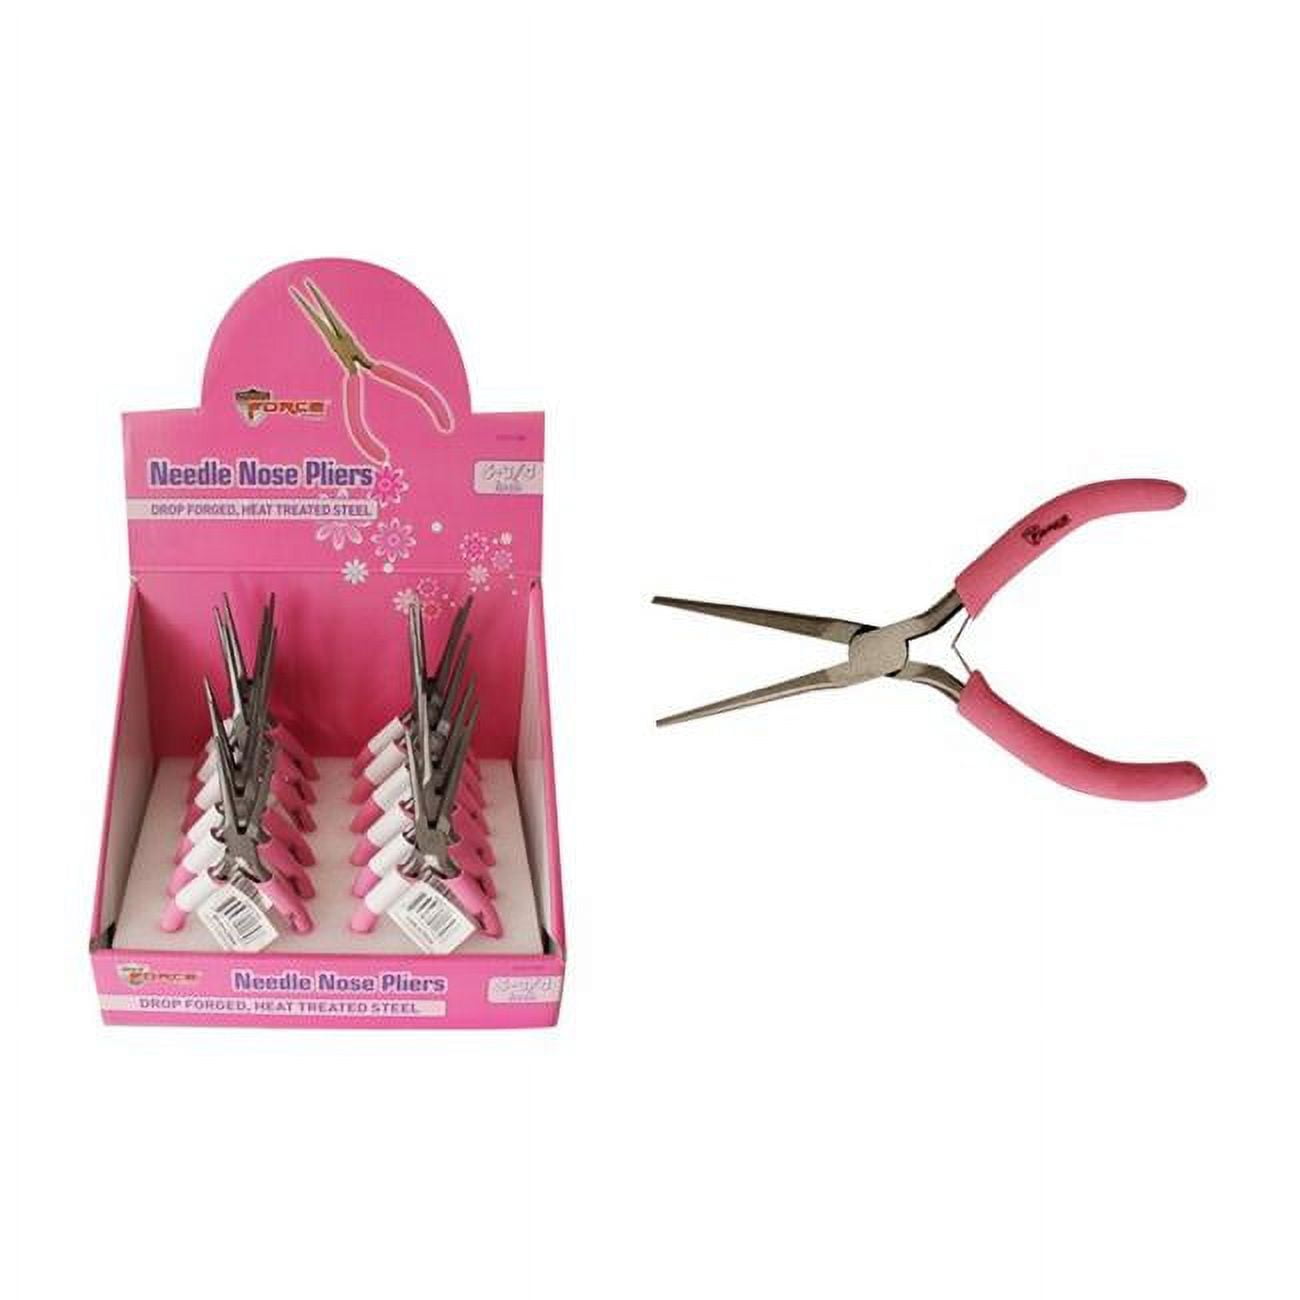 2279387 5.75 In. Needle Nose Pliers, Pink - Case Of 12